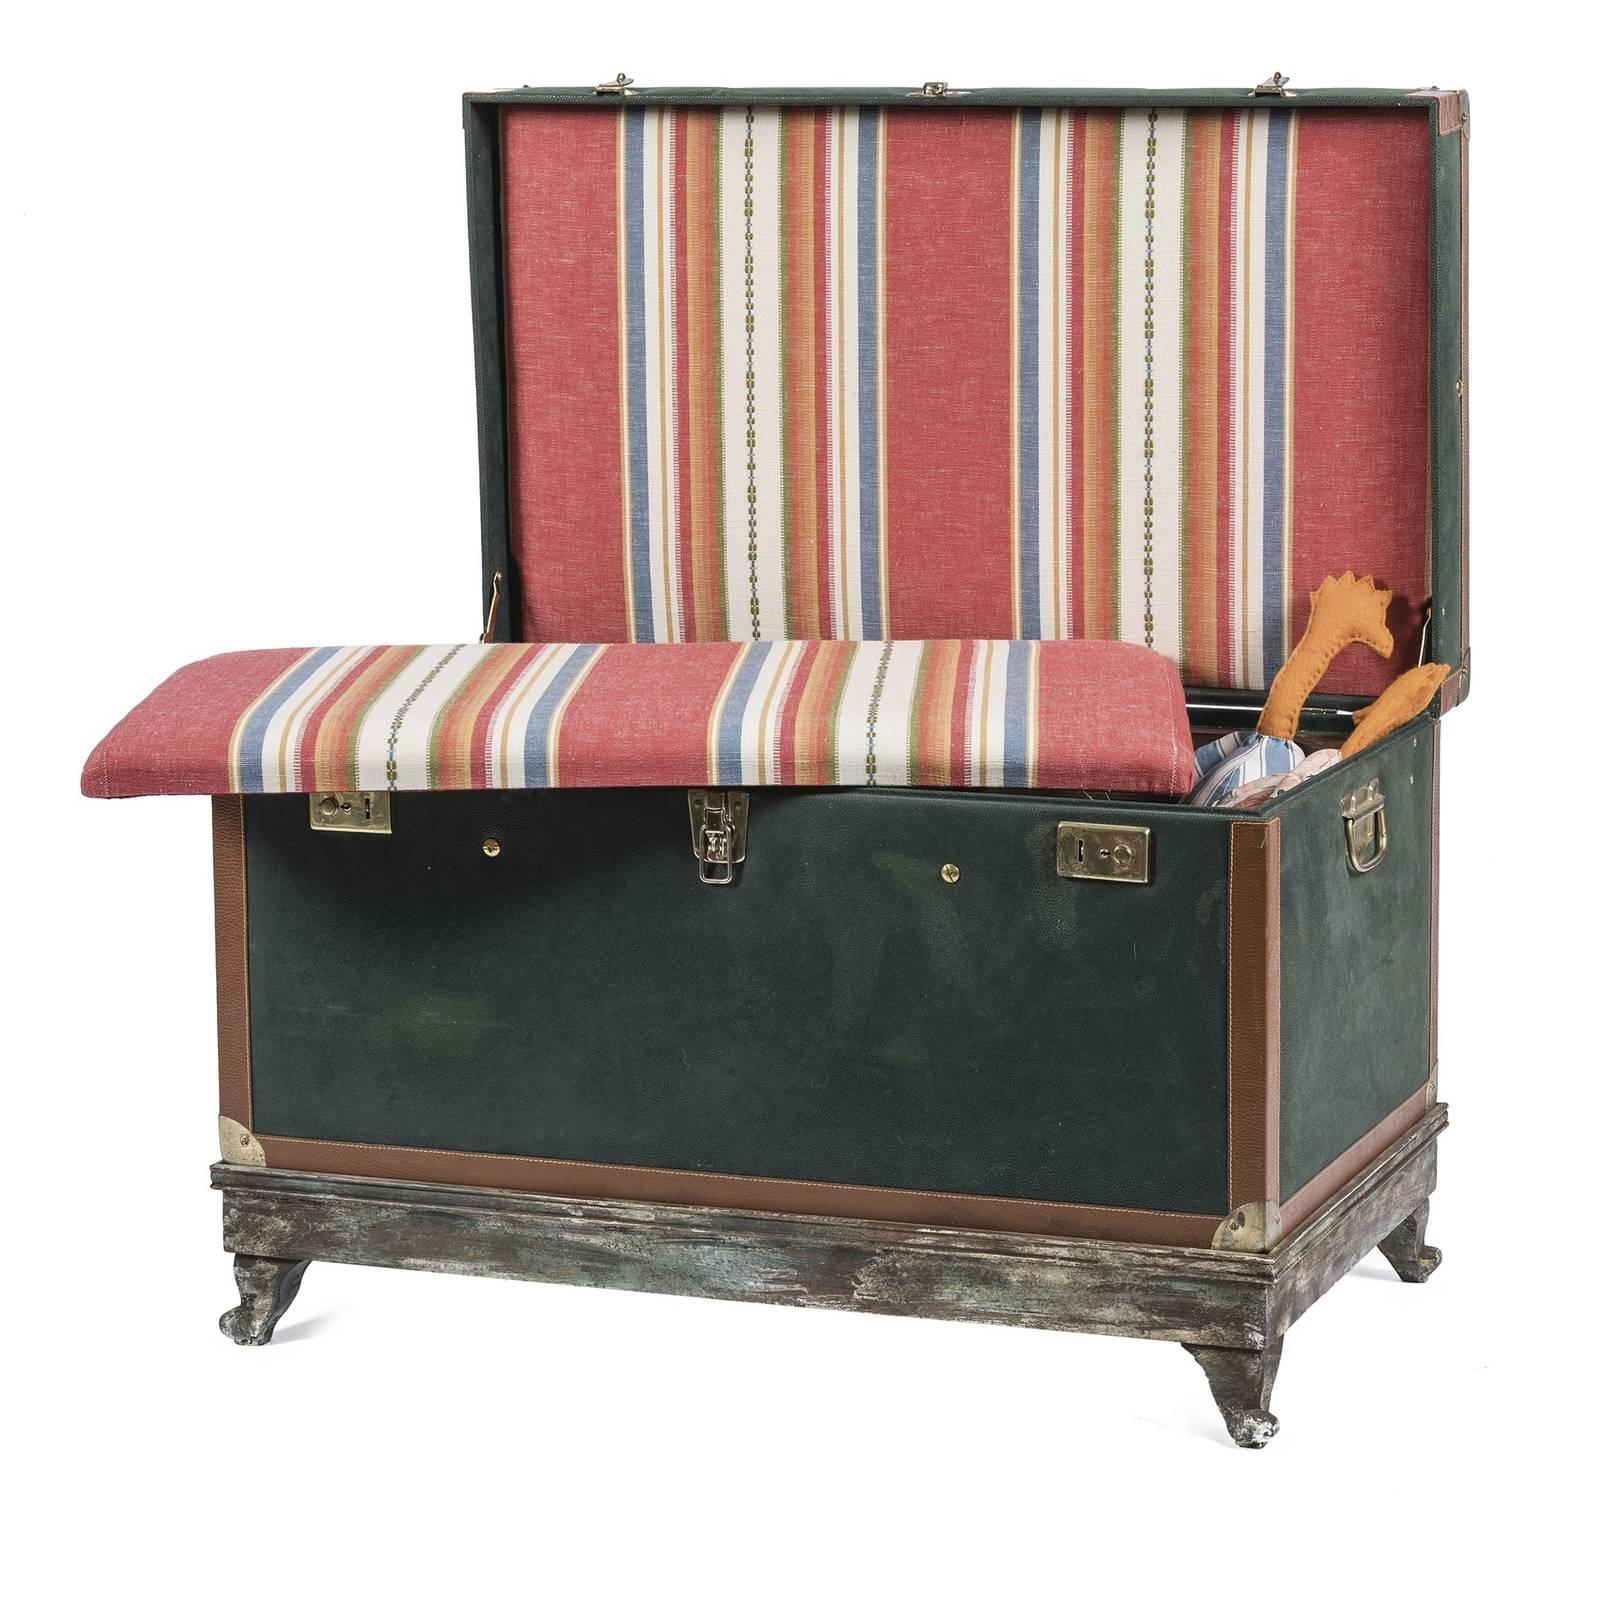 Combining an exquisite and whimsical decorative quality with the functionality of a small sofa, this eclectic loveseat will be a precious addition to an entryway, a small living room, a bedroom, or a study. Elegant and striking, a vintage trunk